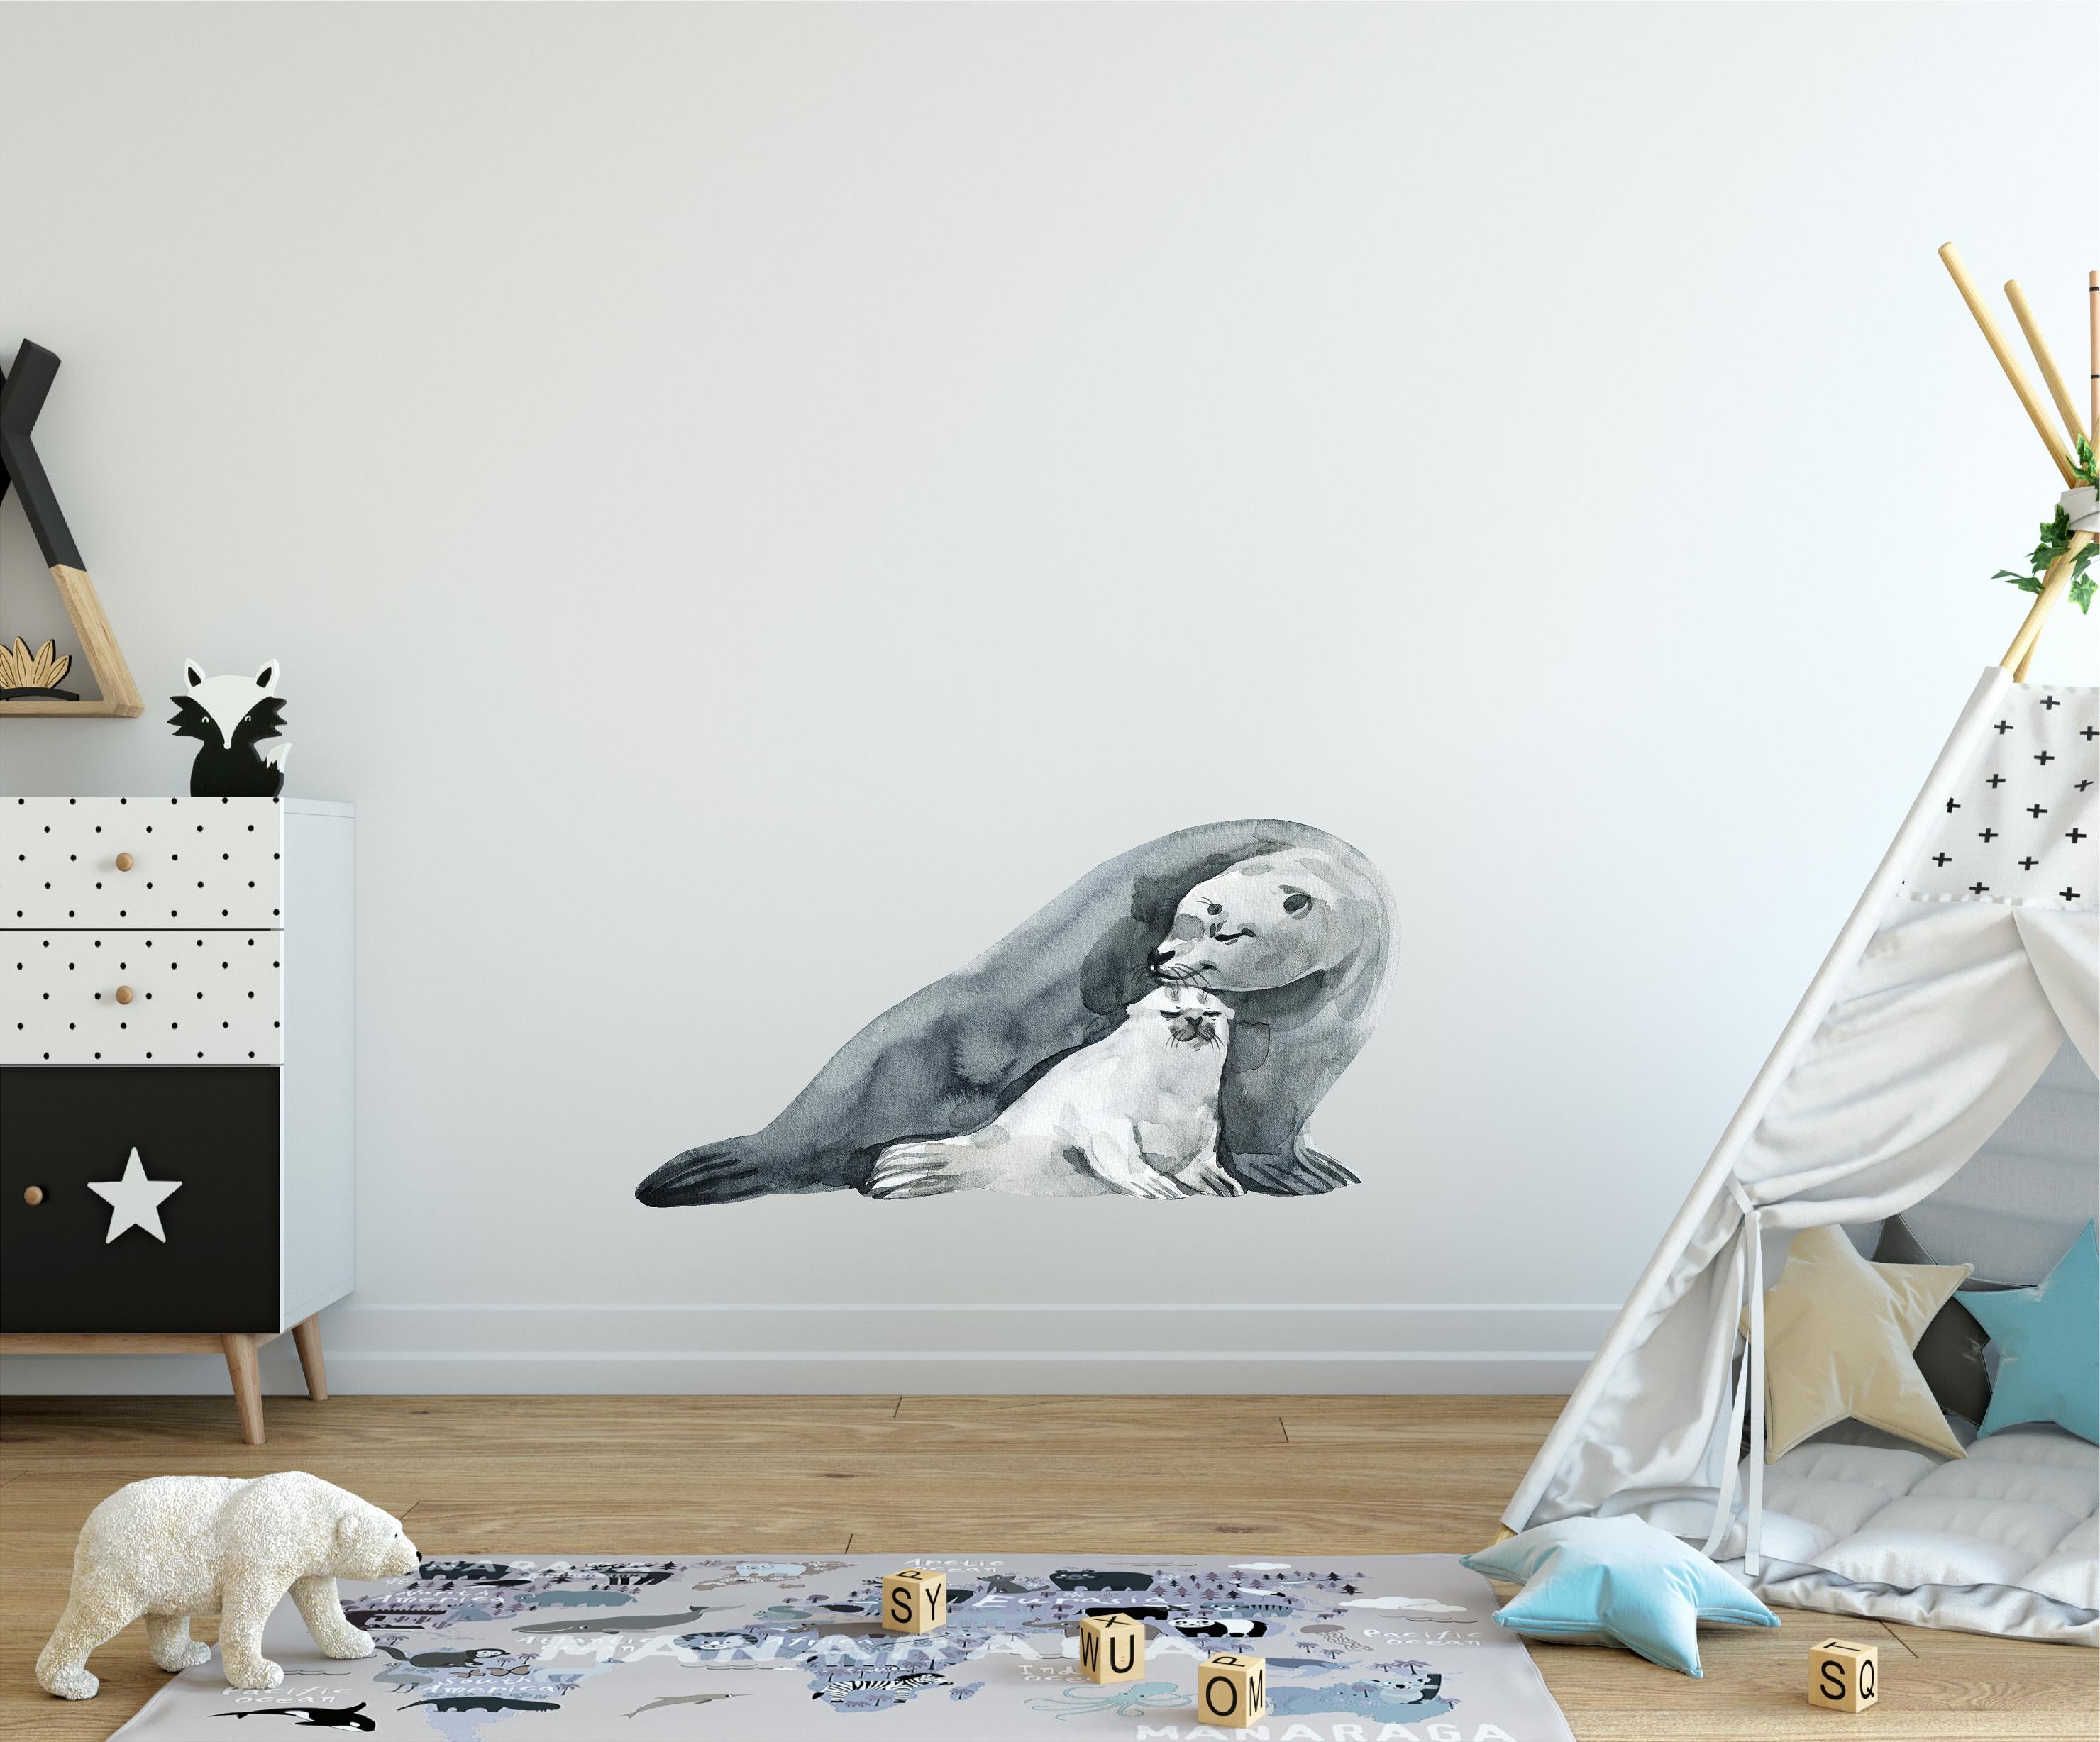 Mother Seal & Baby Seal Cub Wall Decal Removable Fabric Vinyl Wall Sticker